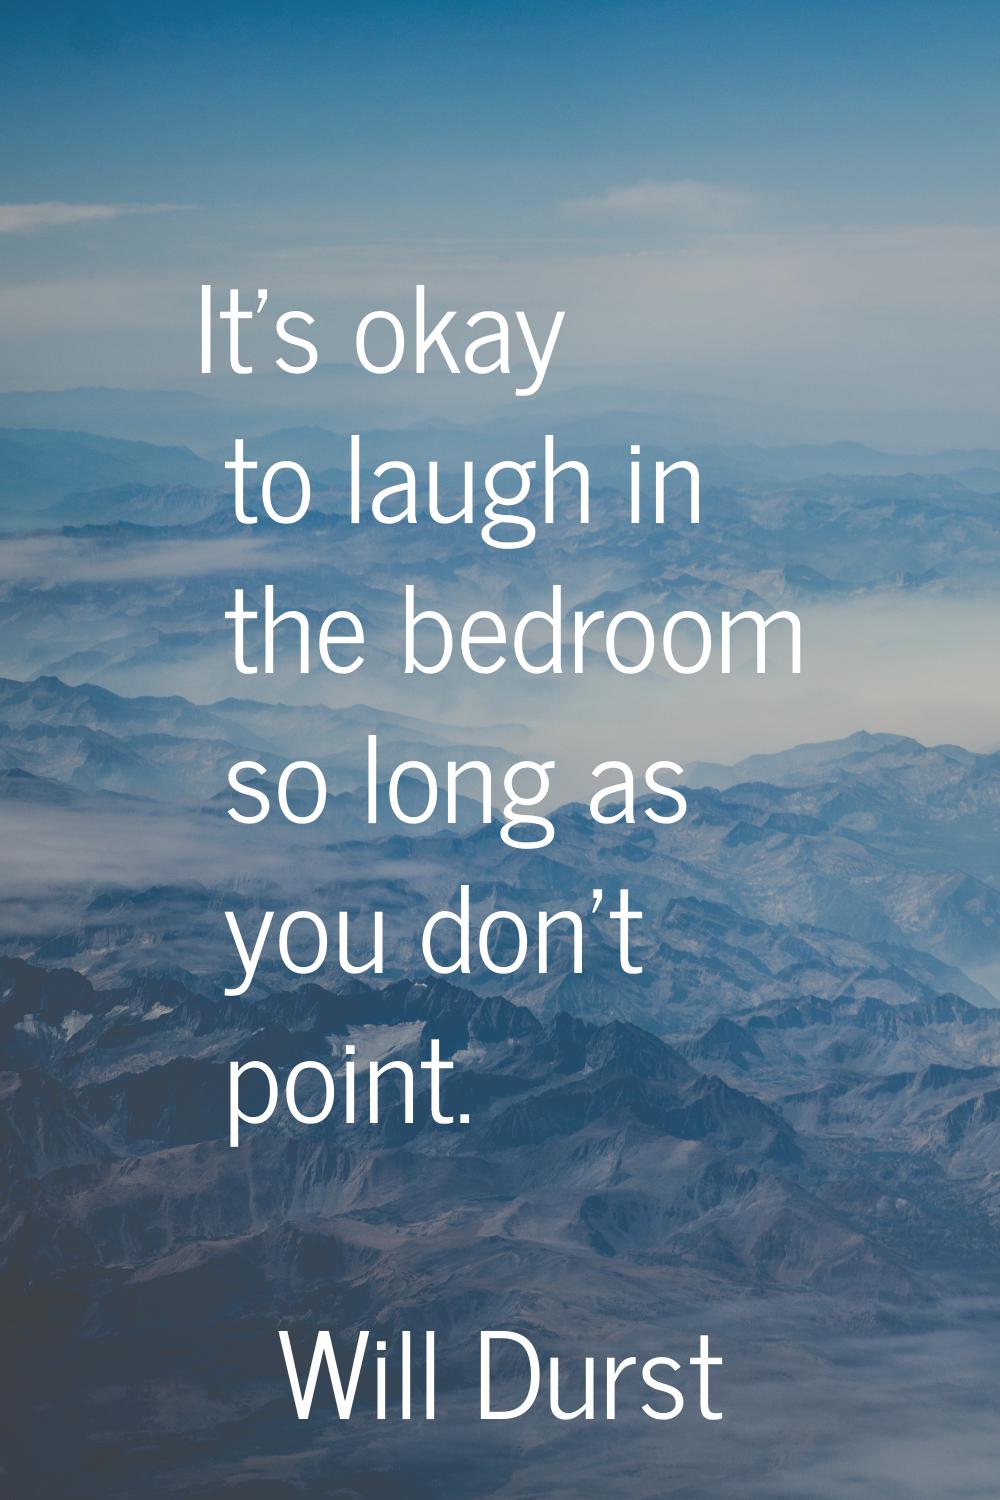 It's okay to laugh in the bedroom so long as you don't point.